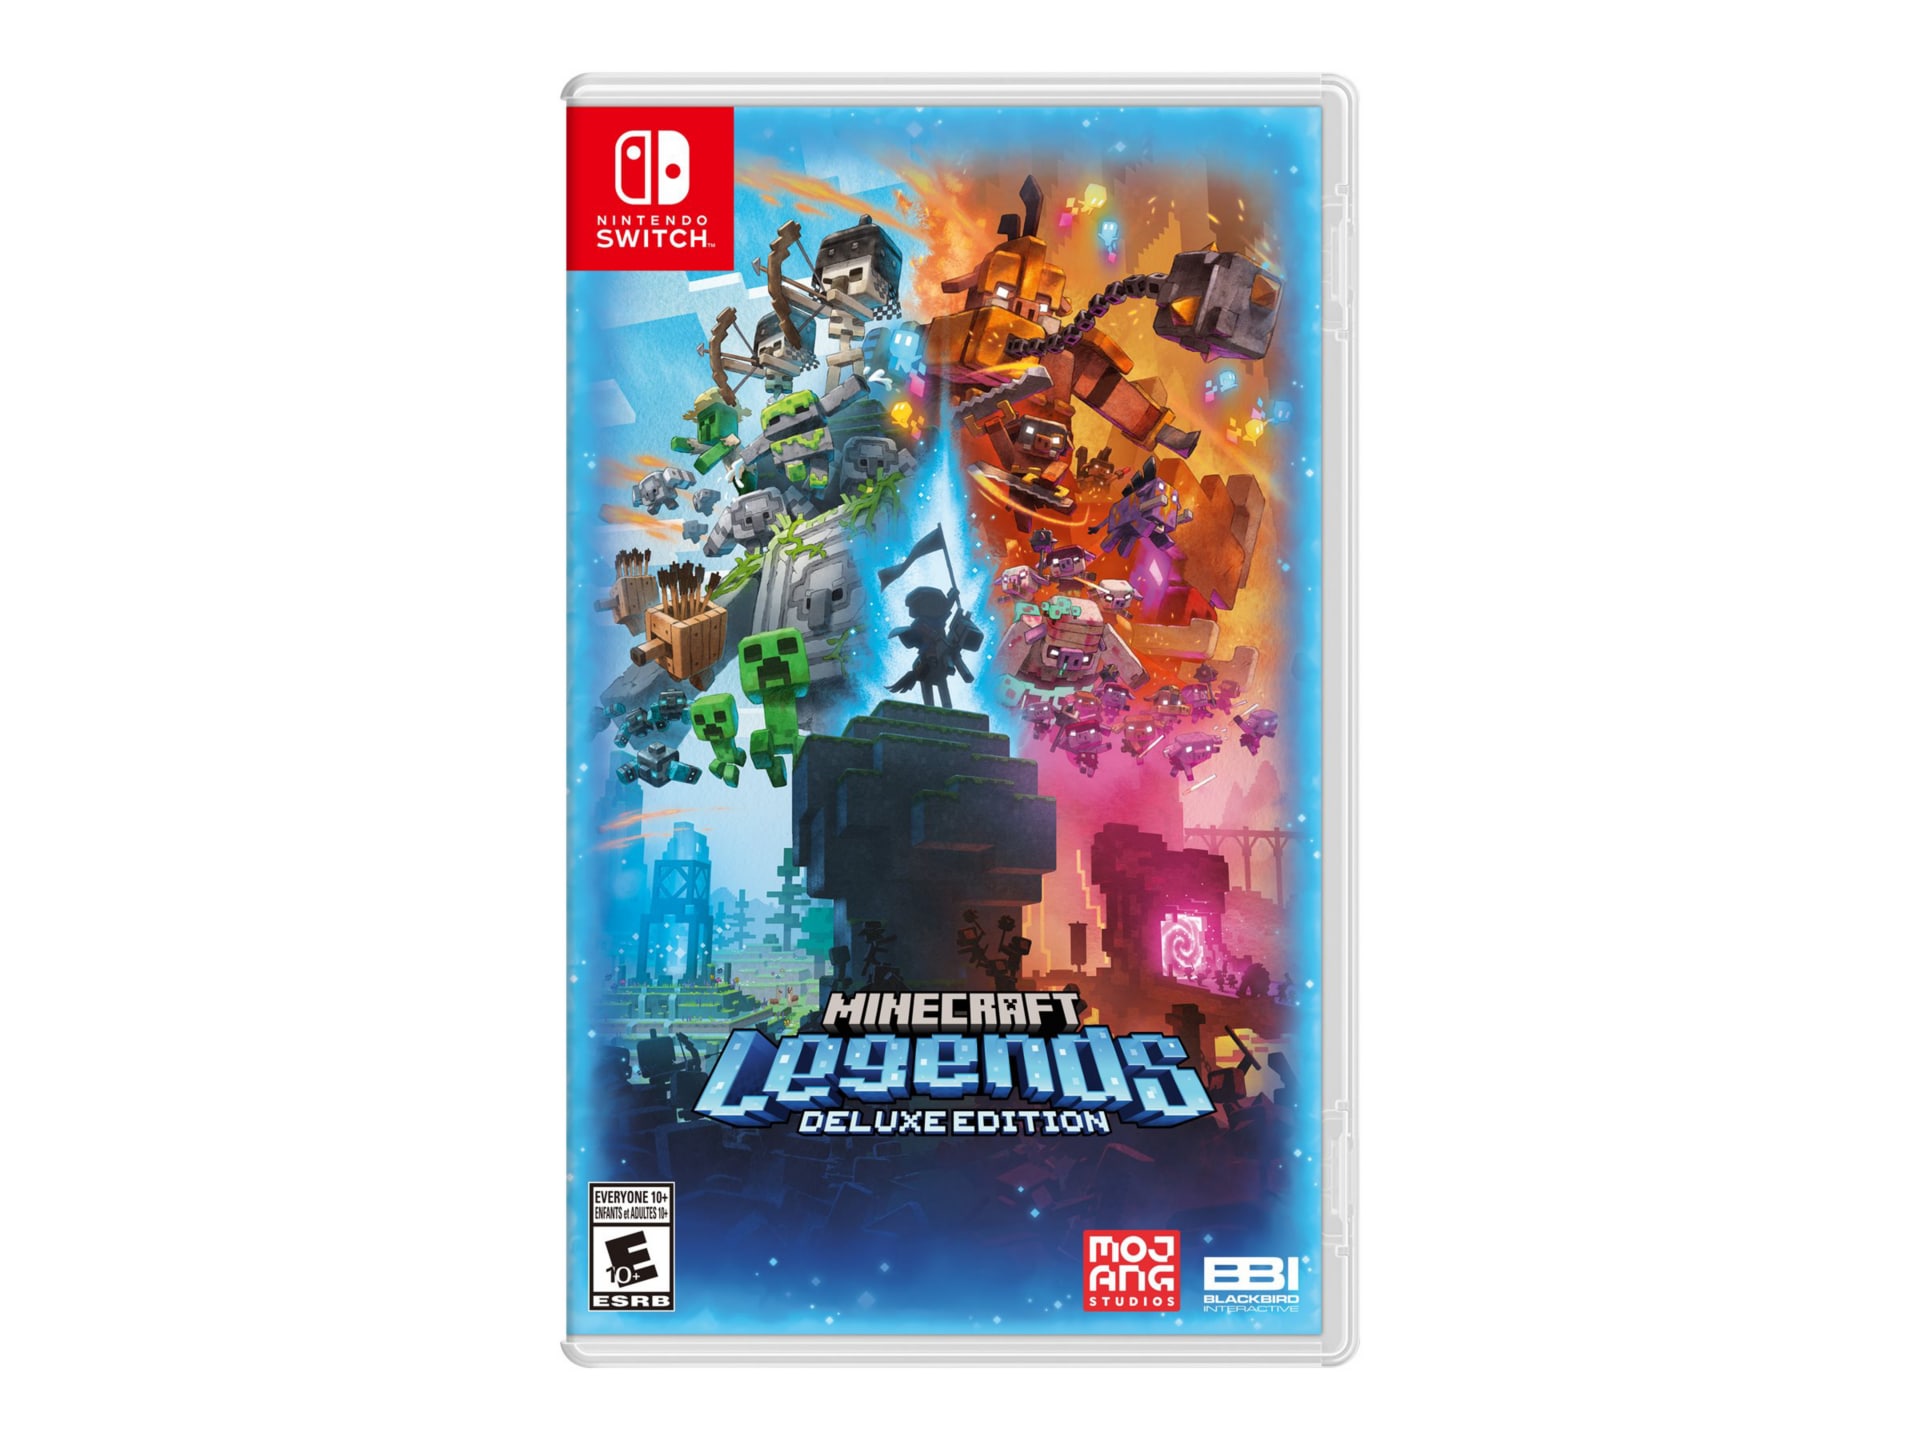 Minecraft Legends Deluxe Edition for Nintendo Switch - Nintendo